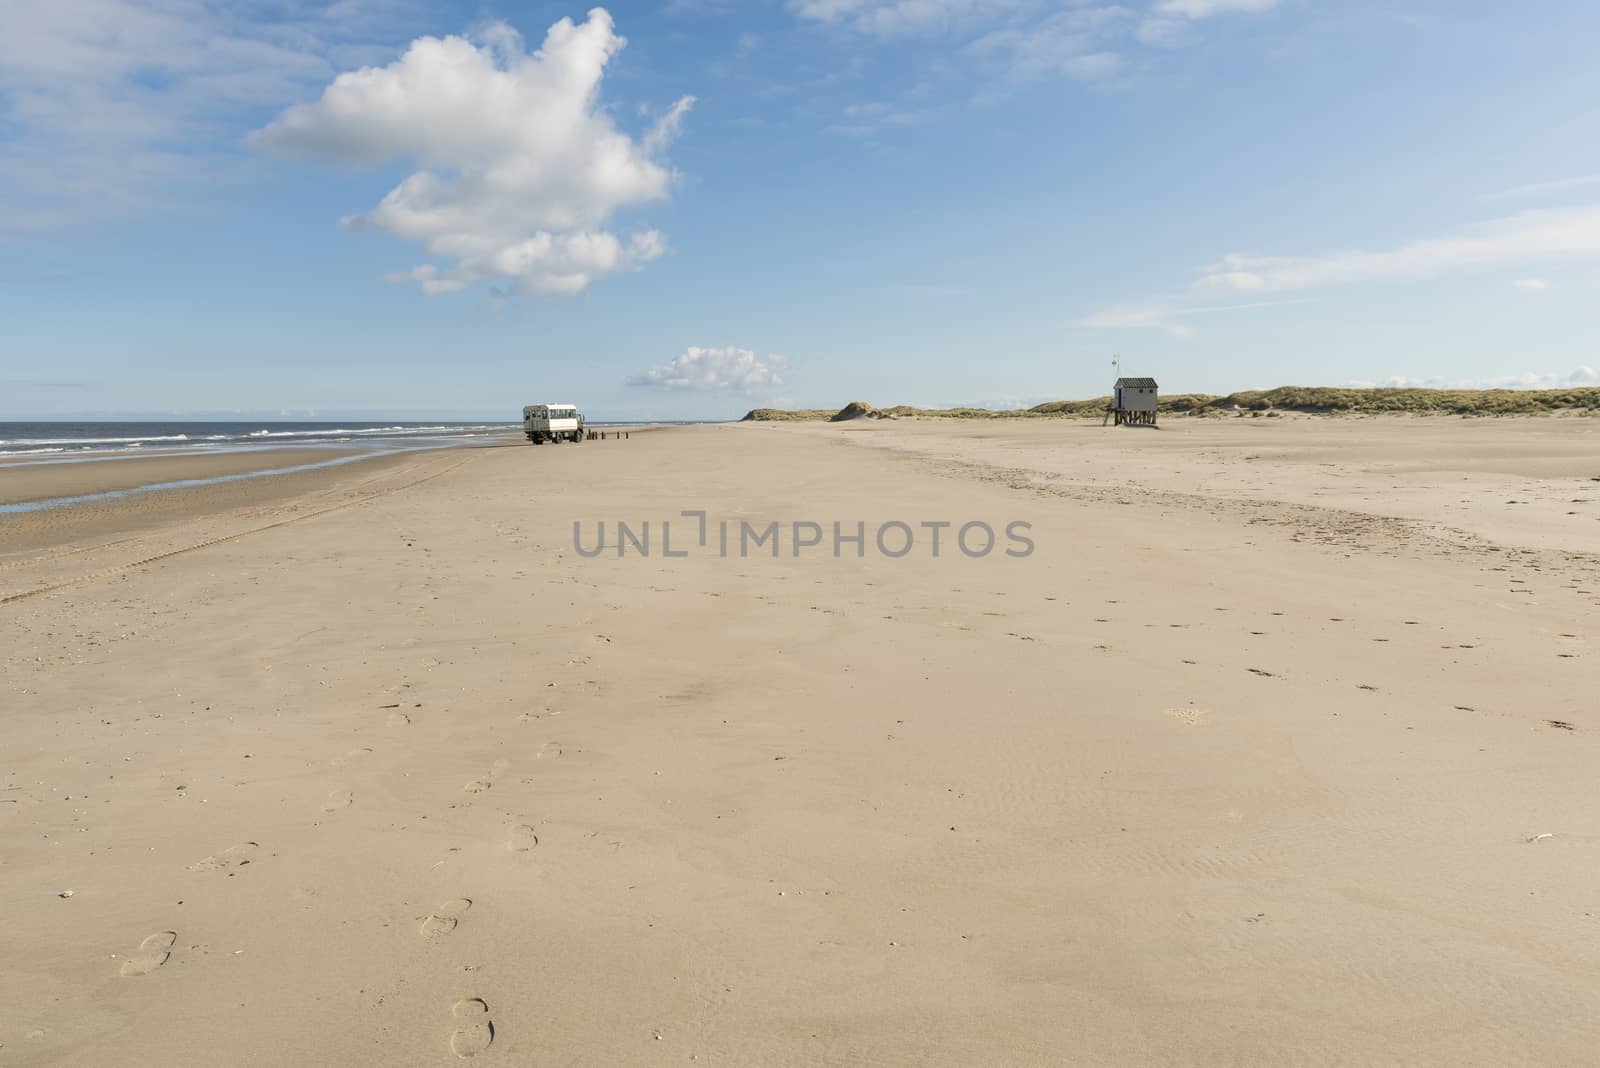 Famous authentic wooden beach hut, for shelter, on the island of Terschelling in the Netherlands.
